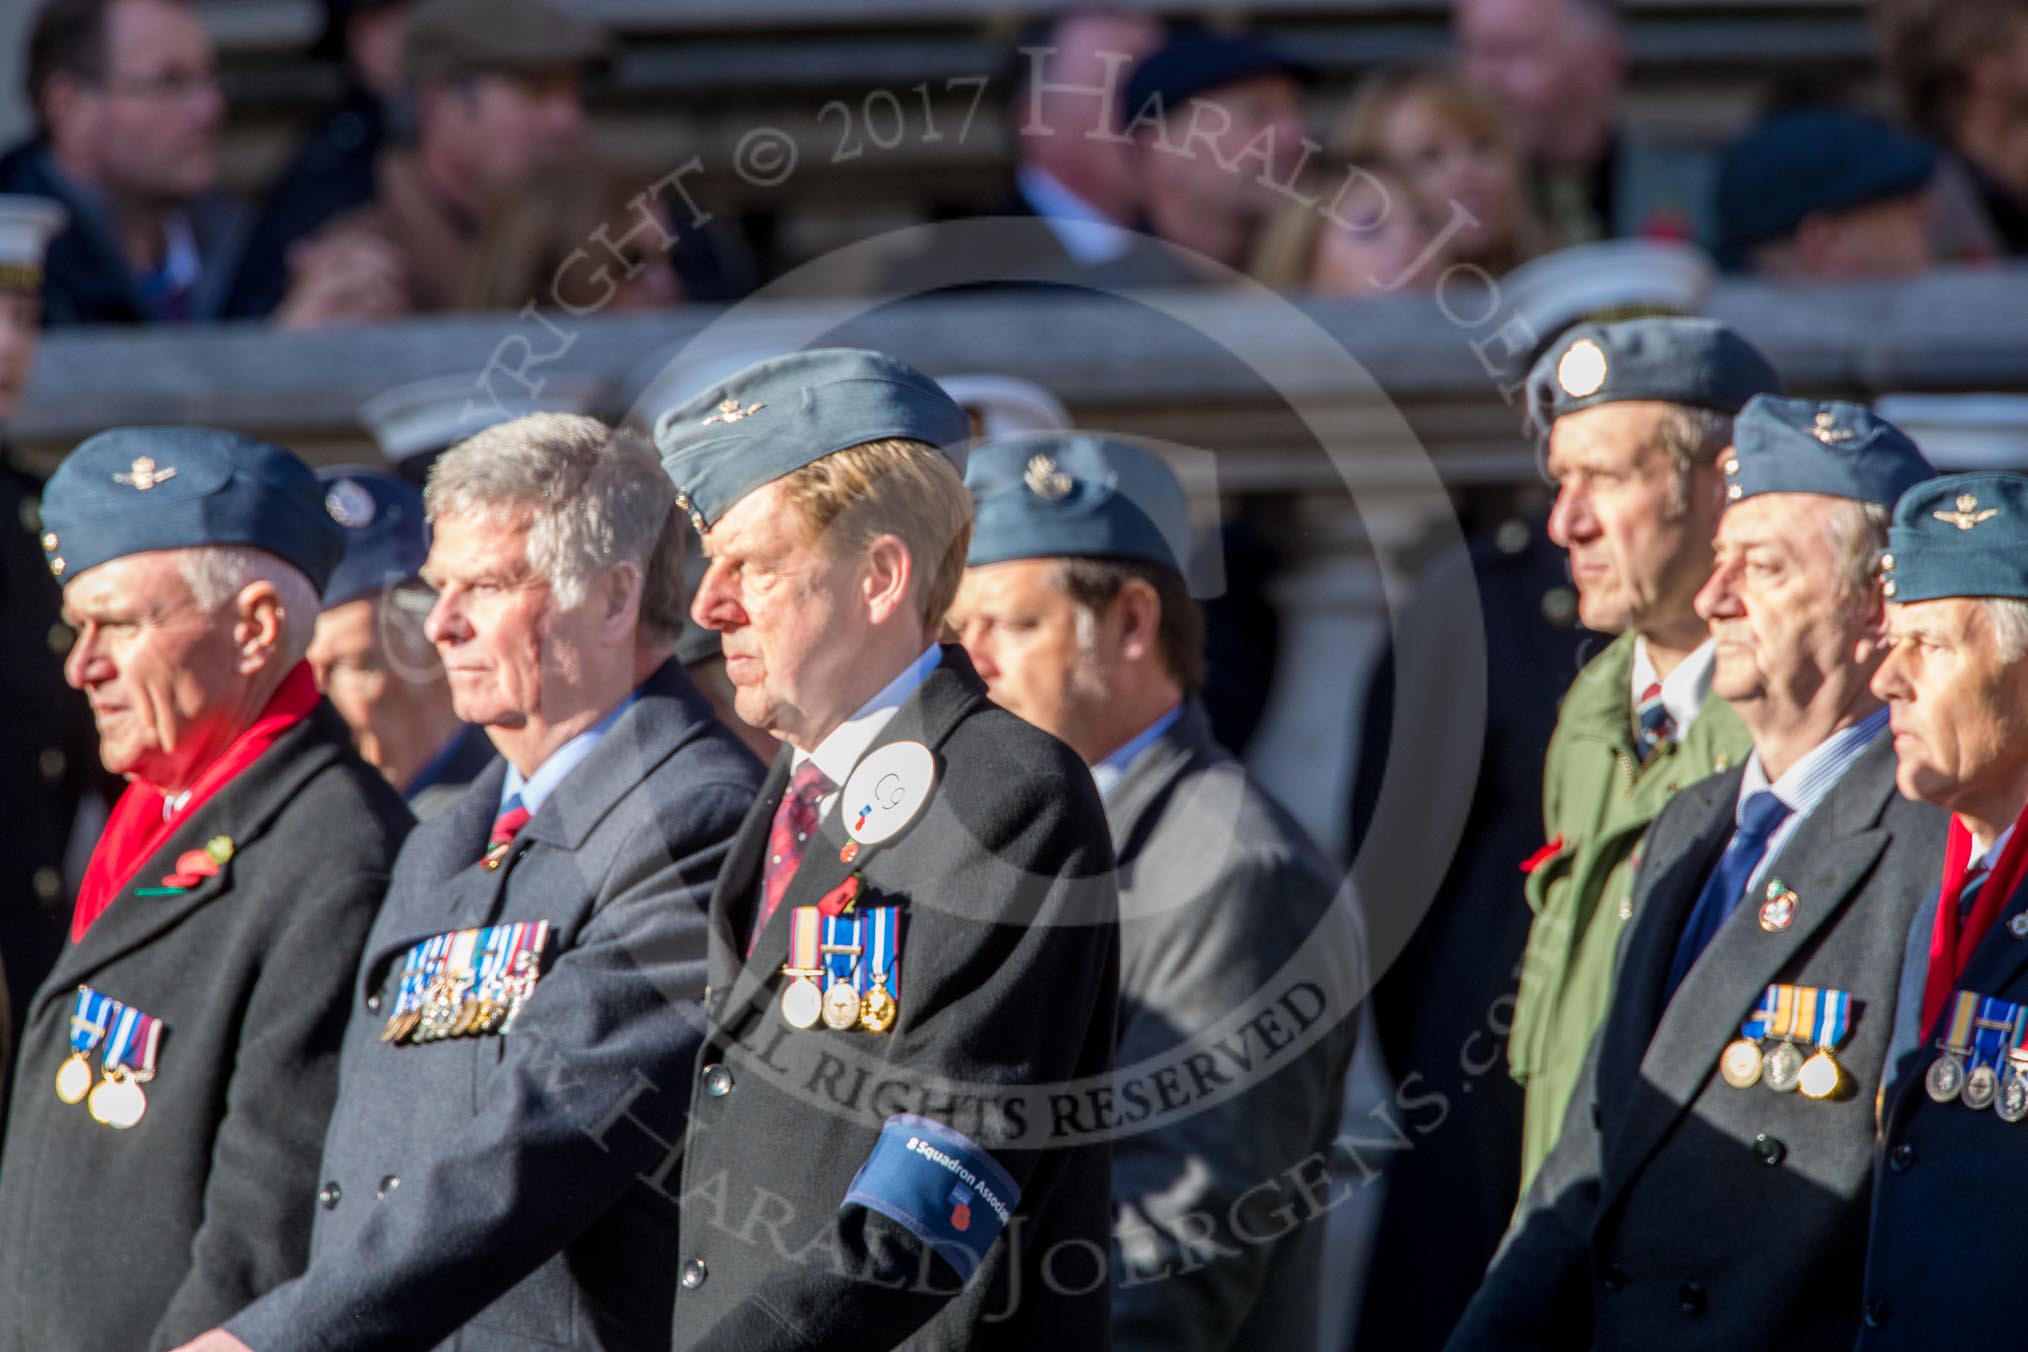 RAF 8 Squadron Association (Group C9, 12 members) during the Royal British Legion March Past on Remembrance Sunday at the Cenotaph, Whitehall, Westminster, London, 11 November 2018, 12:16.